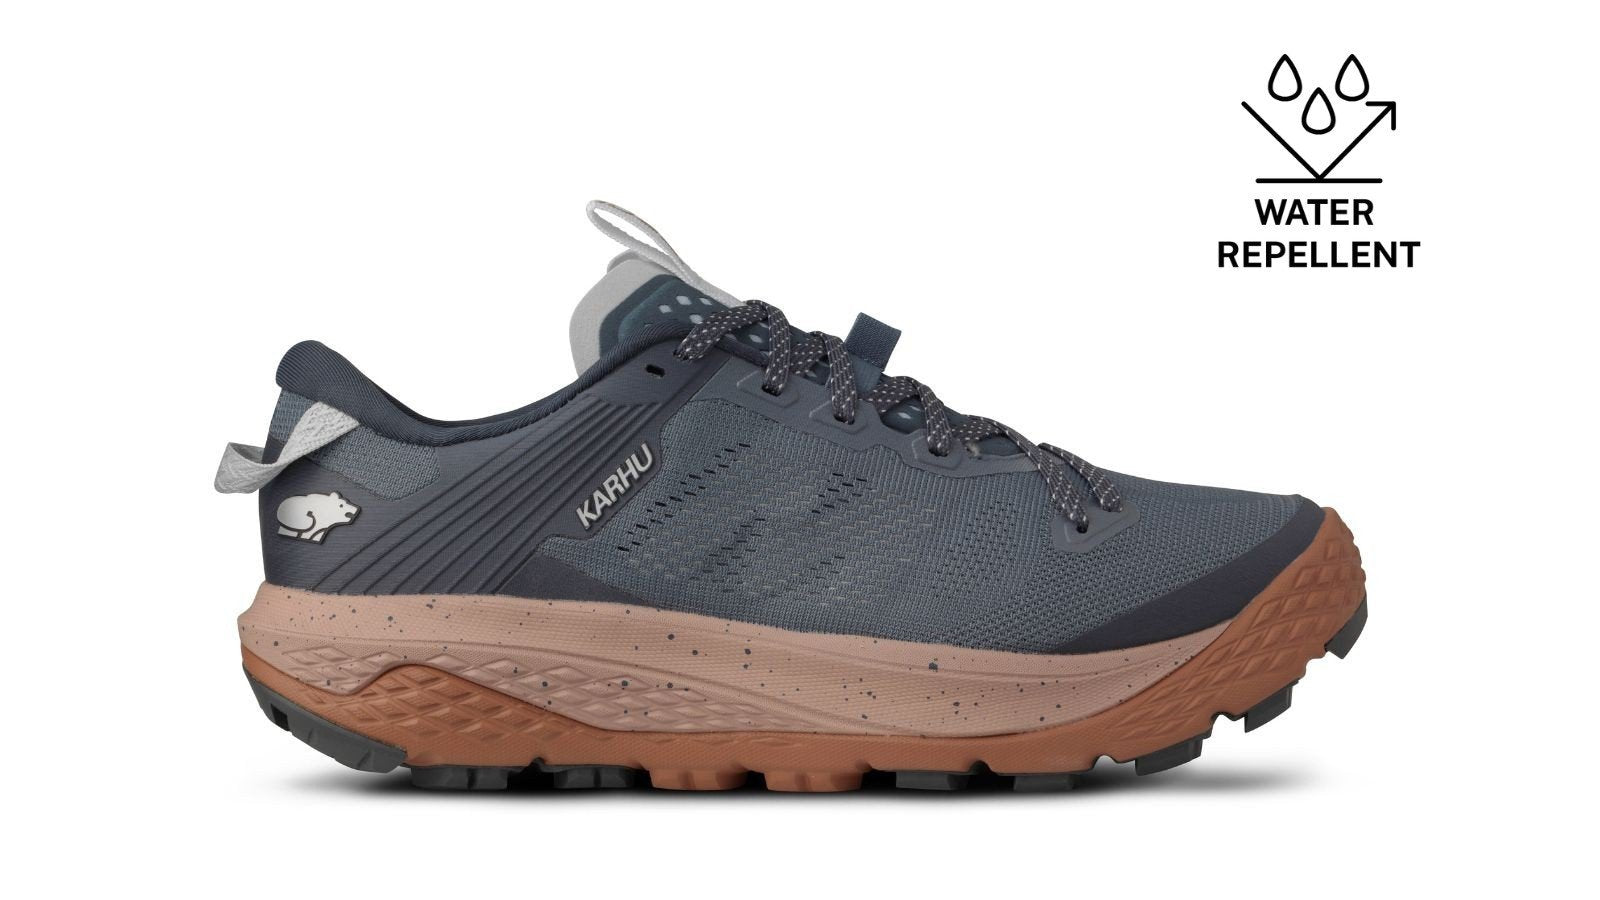 WOMEN'S IKONI TRAIL 1.0 WR - STORMY WEATHER / RUGBY TAN